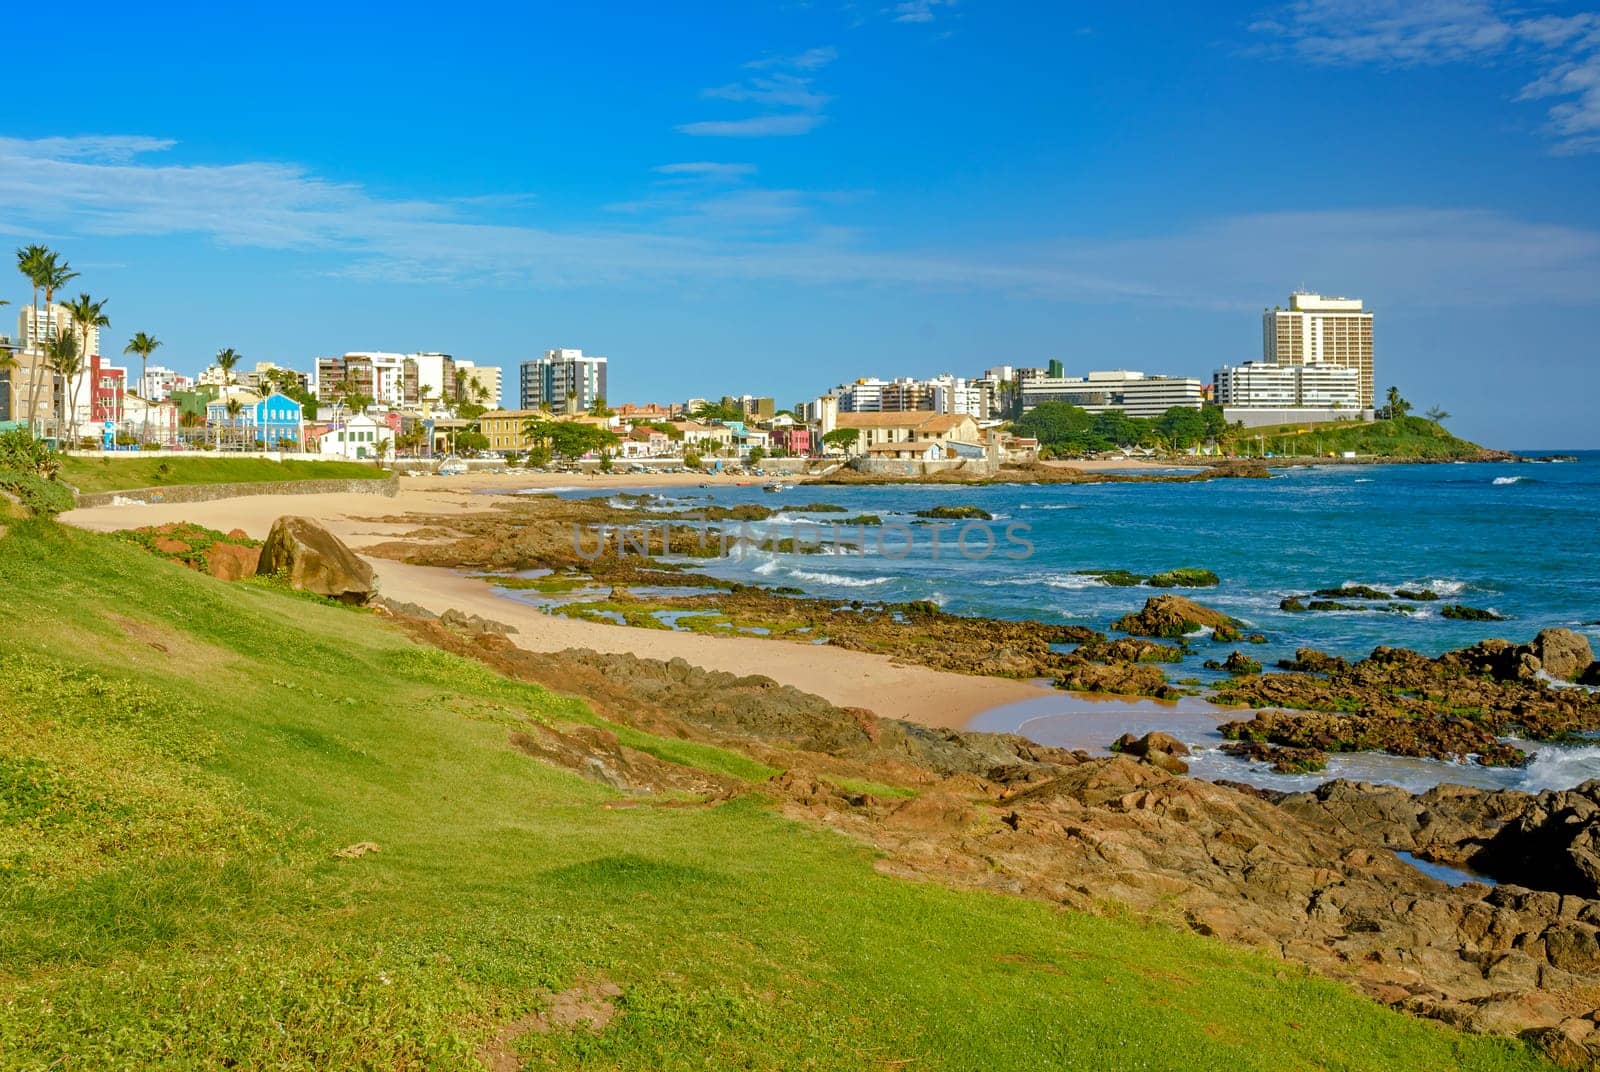 View of the beautiful beach in Salvador by Fred_Pinheiro